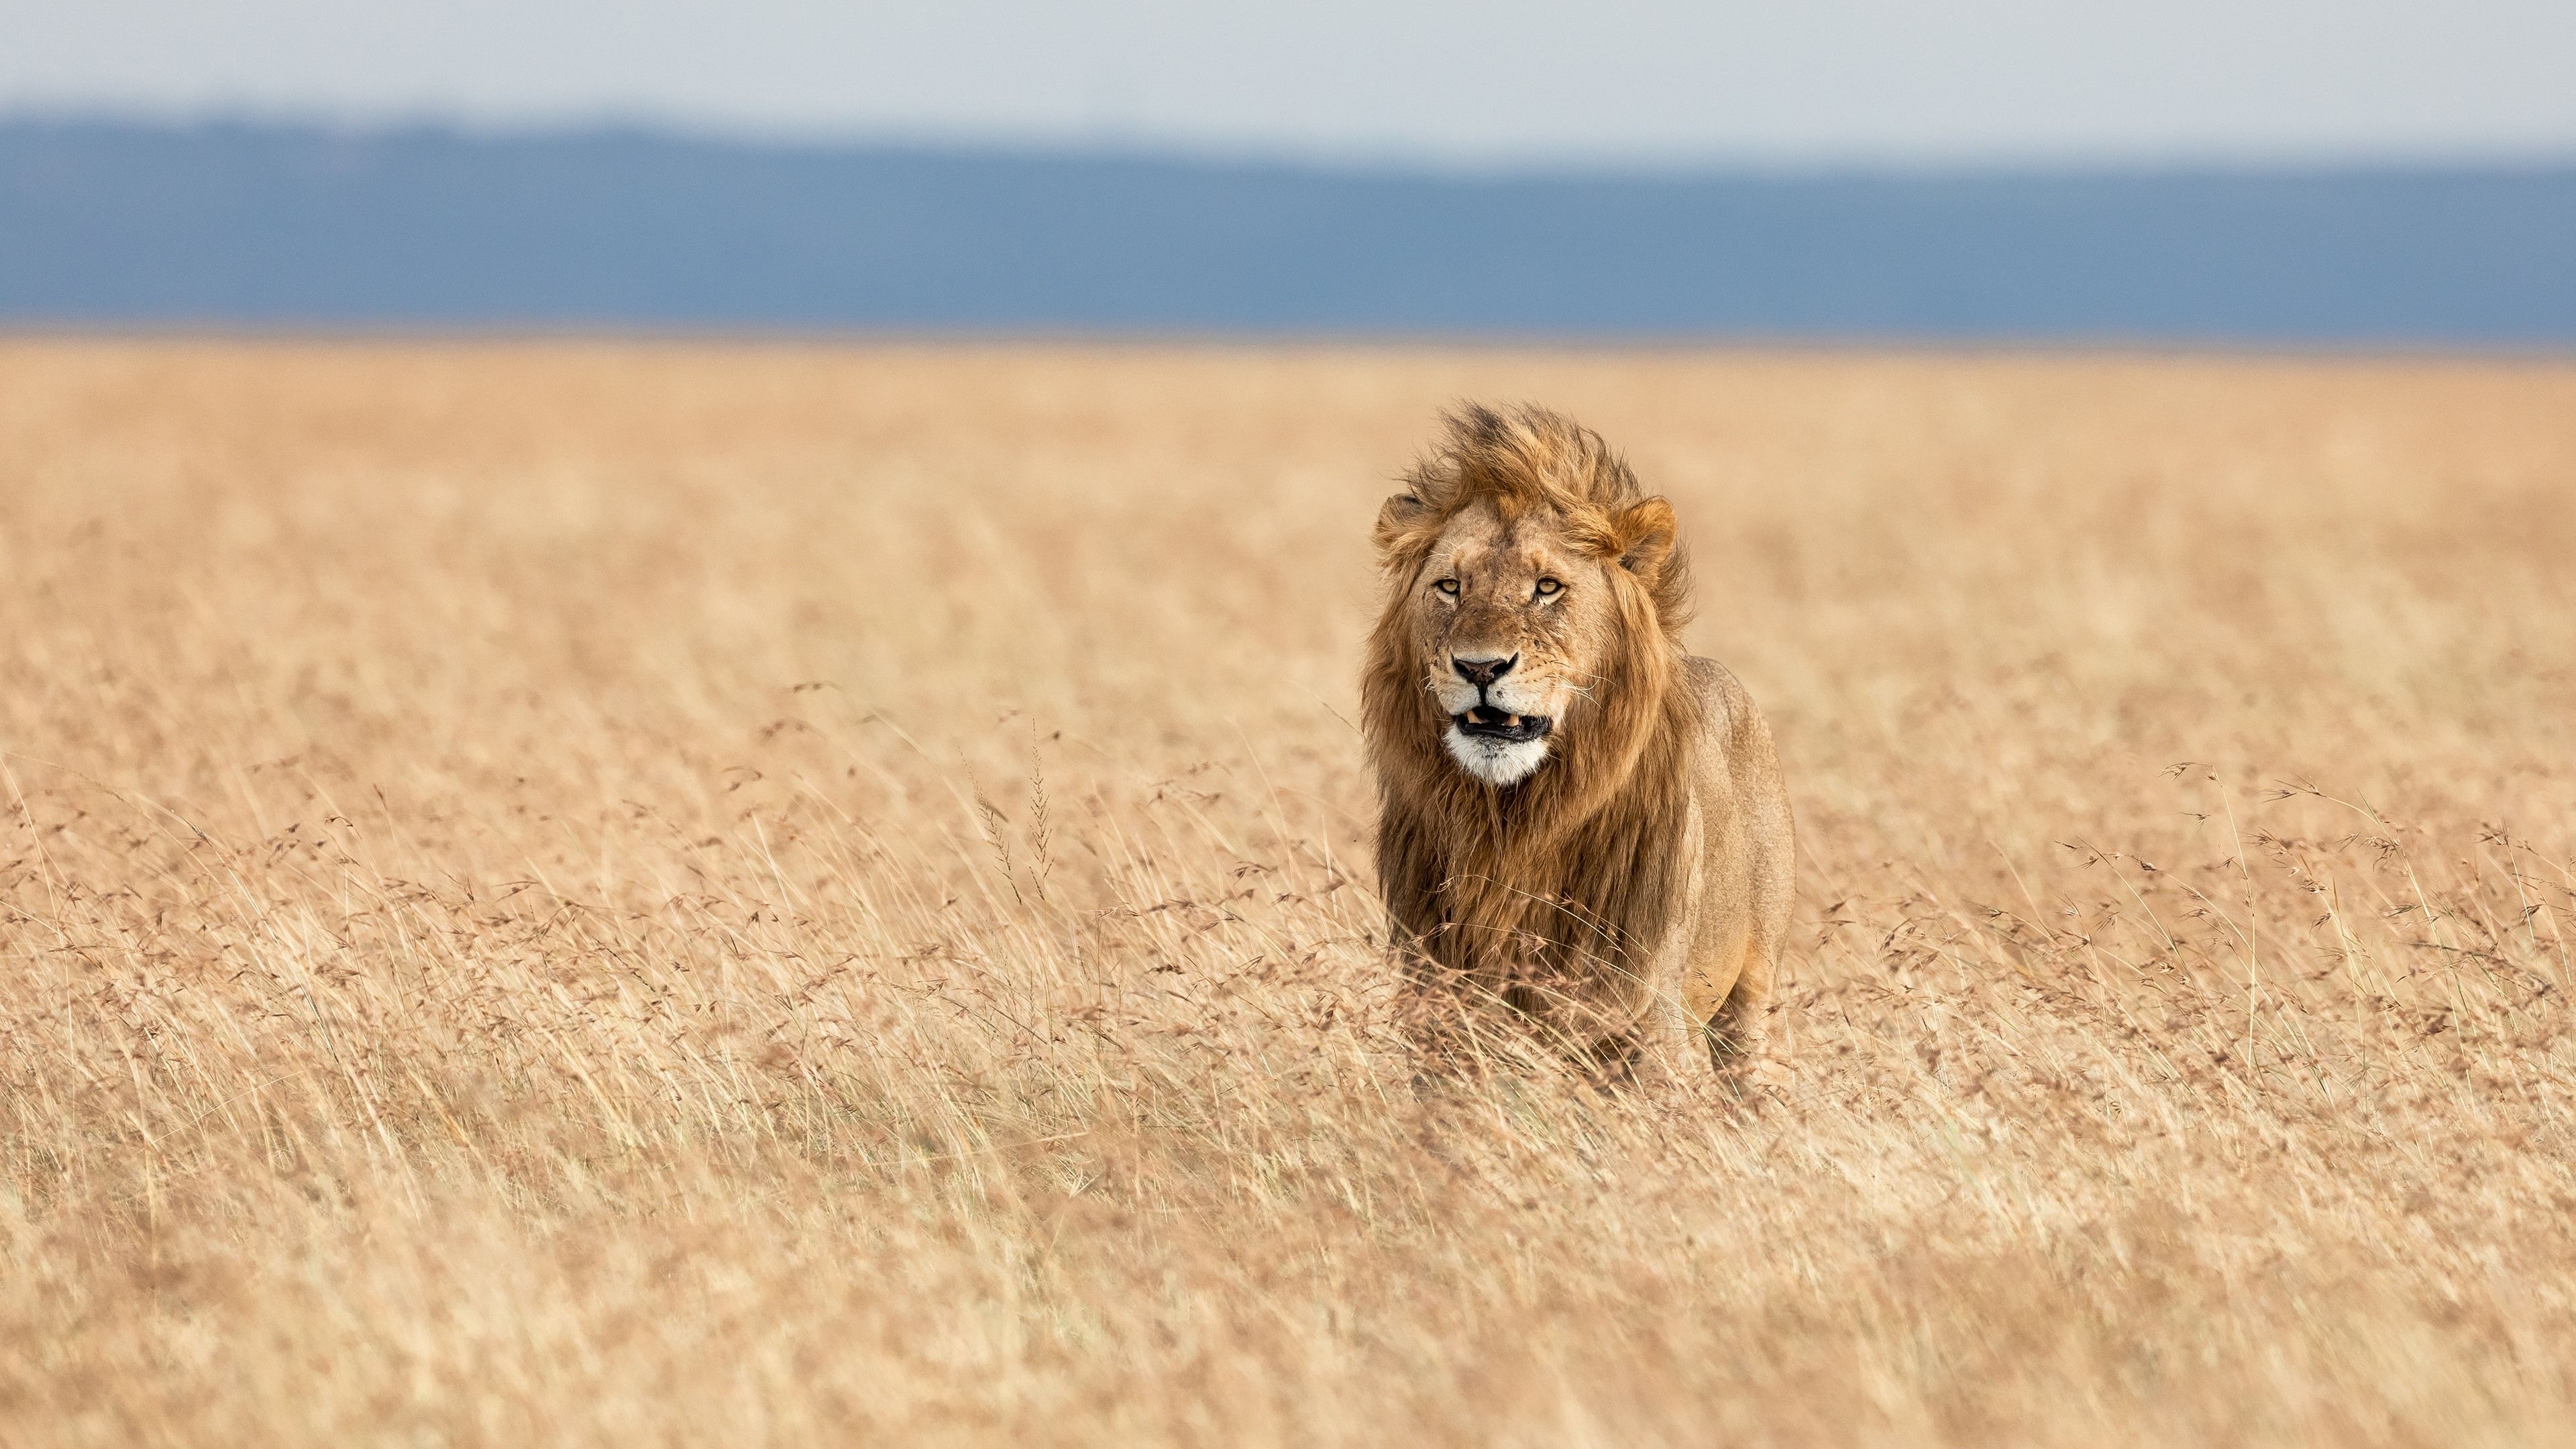 Wallpaper Lion in the wind, Africa 3840x2160 UHD 4K Picture, Image